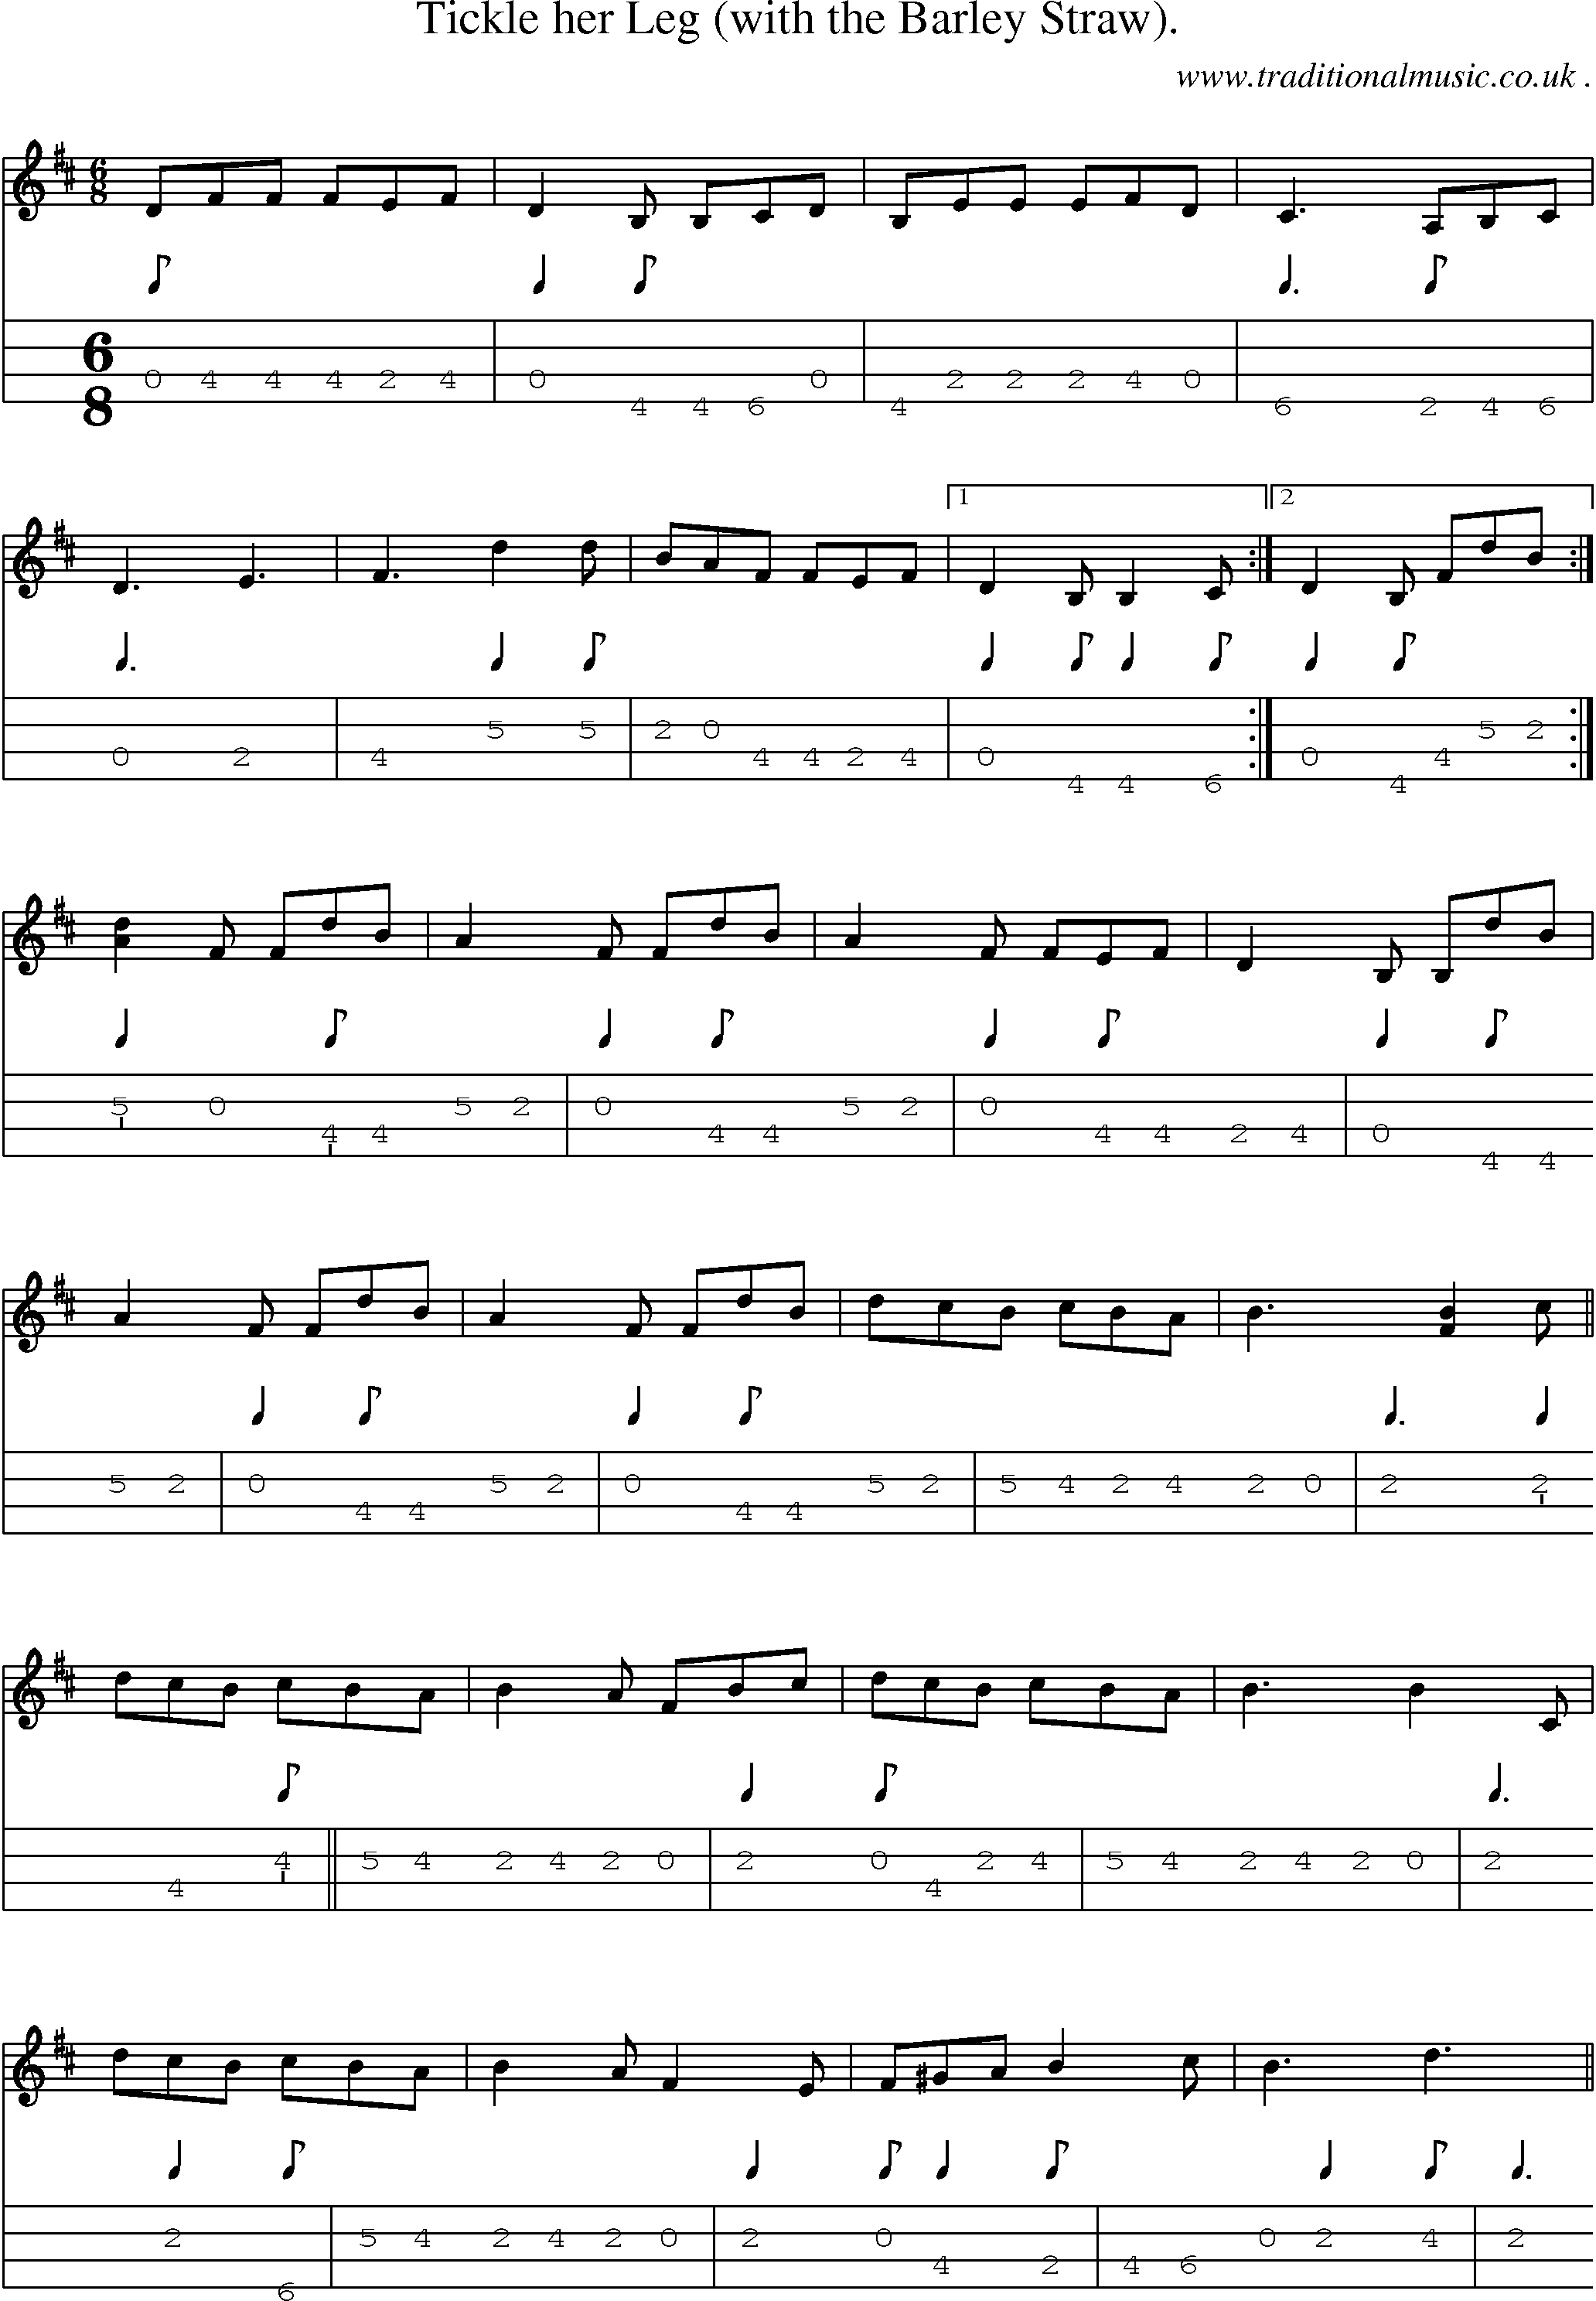 Sheet-Music and Mandolin Tabs for Tickle Her Leg (with The Barley Straw)